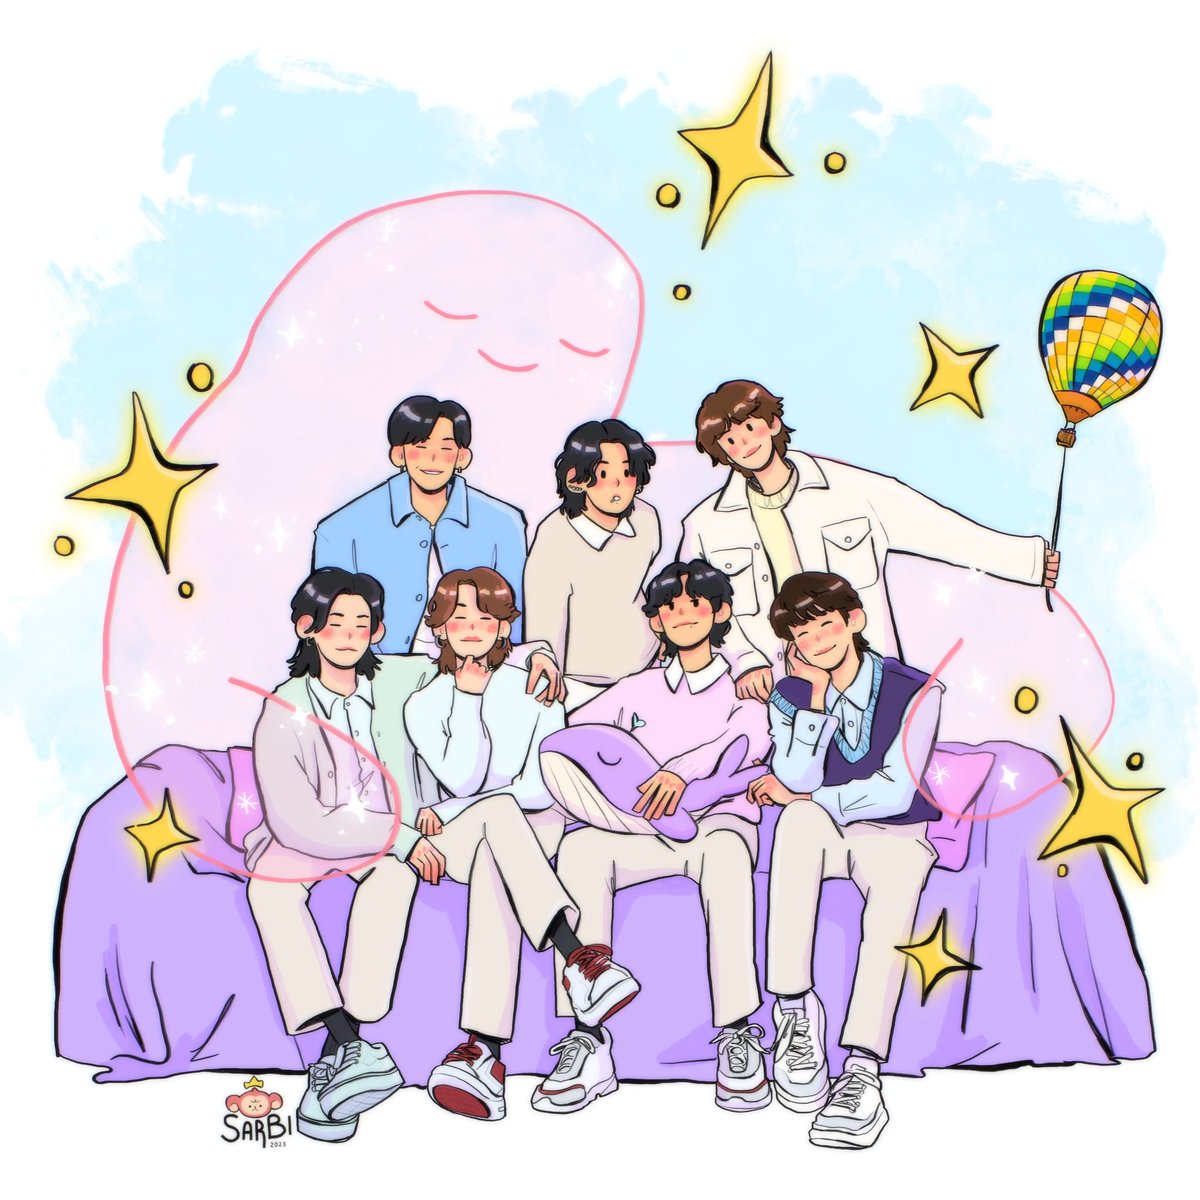 “the youth where you and I were together, perhaps it may be the beginning” 💞 happy 10 years,  @BTS_twt ✨ 

#BTS10thAnniversary #btsfanart #BTSFESTA #BTSFesta2023